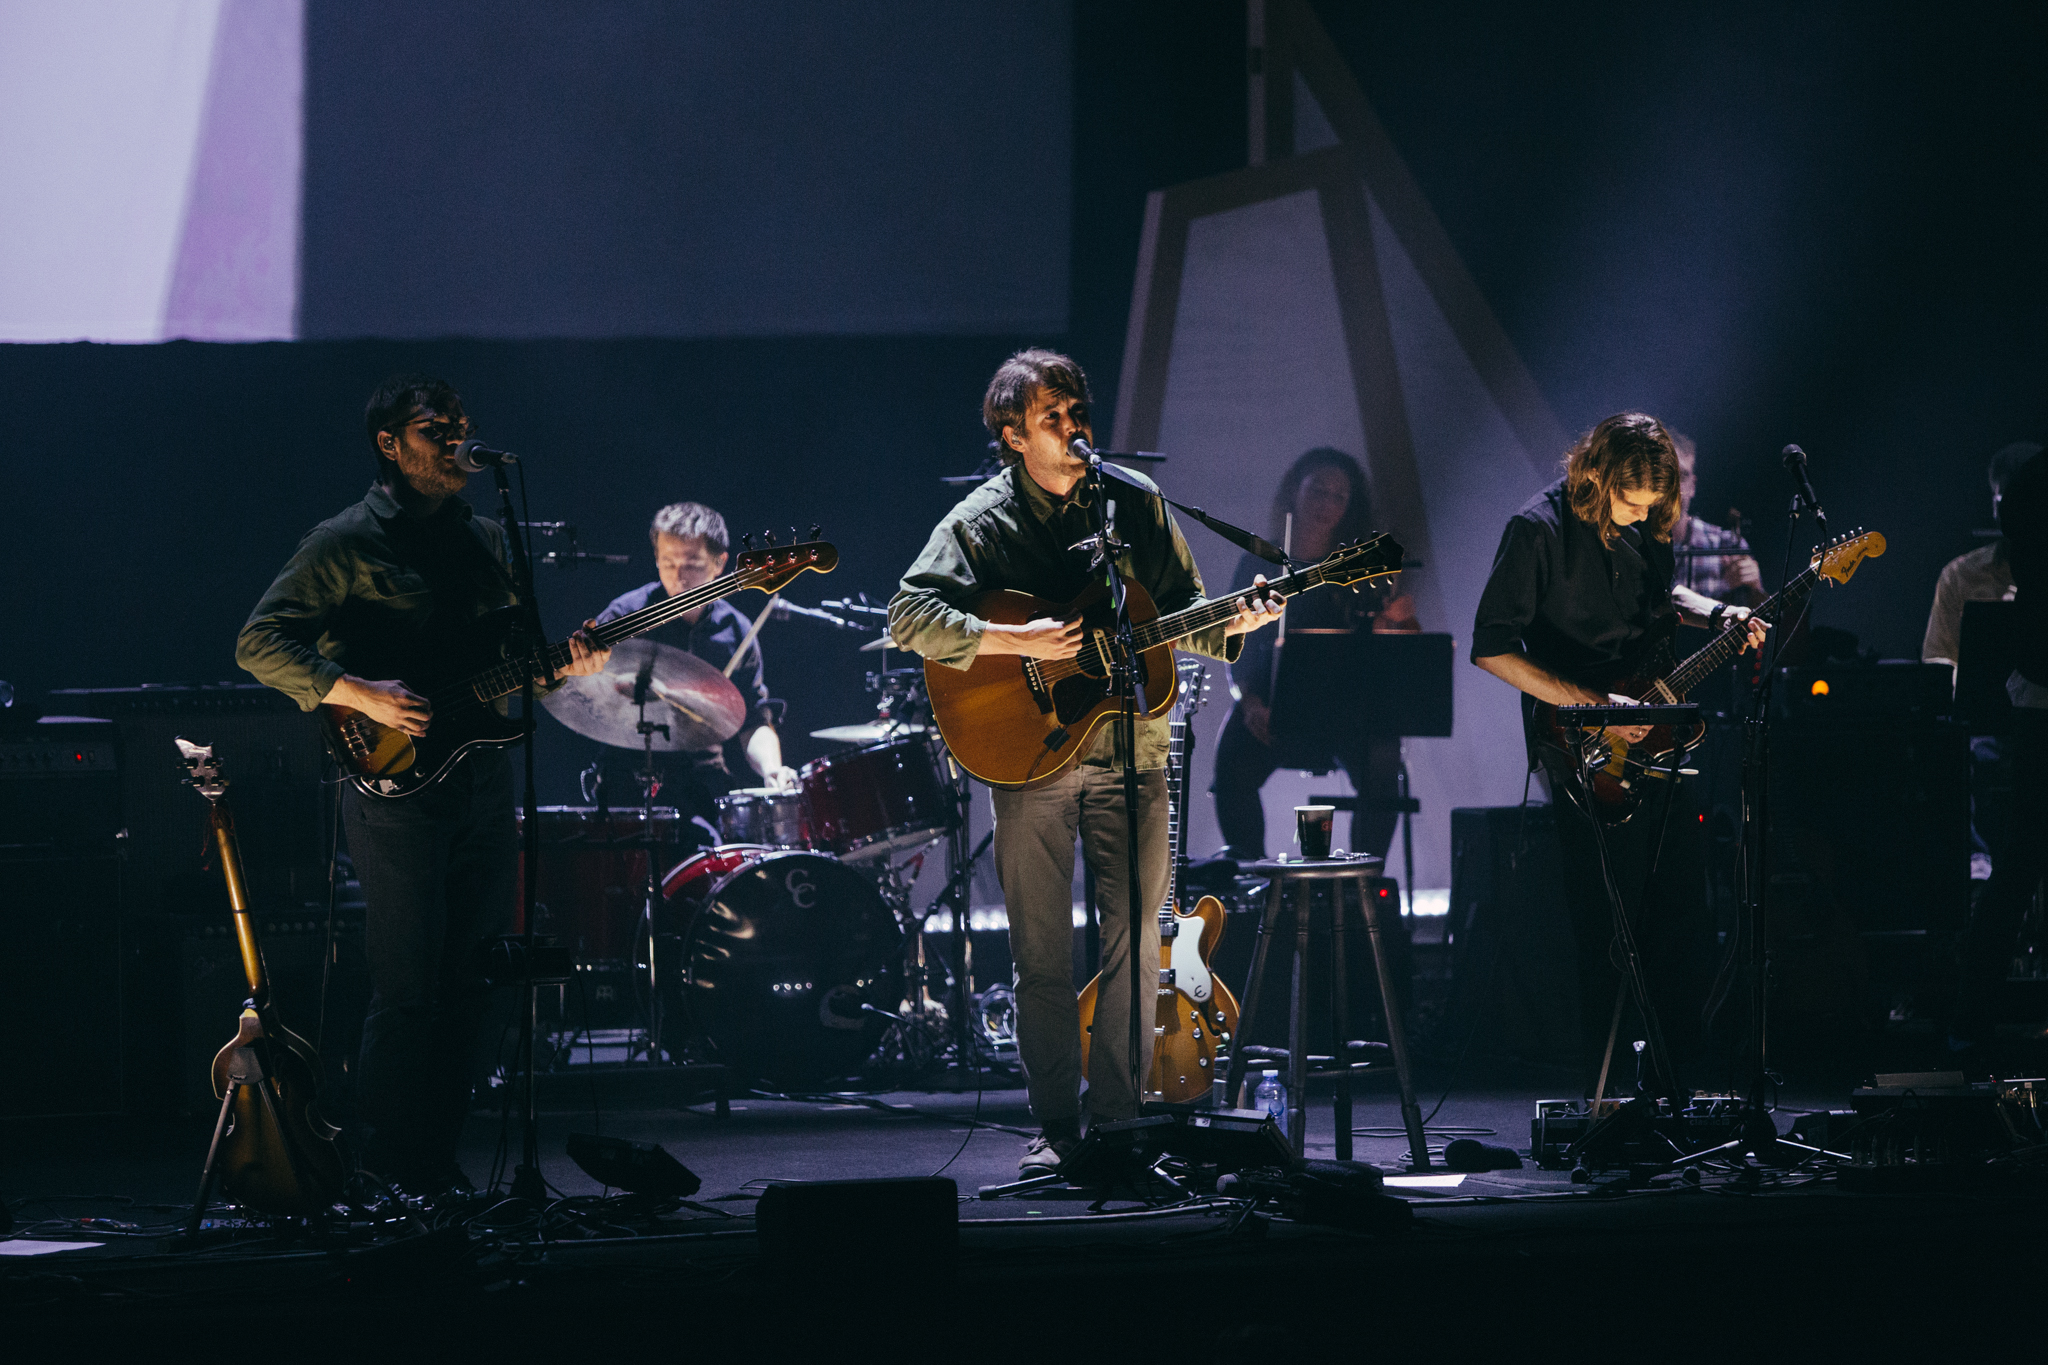 Marvel At The Photos From Fleet Foxes' Magical Vivid Show